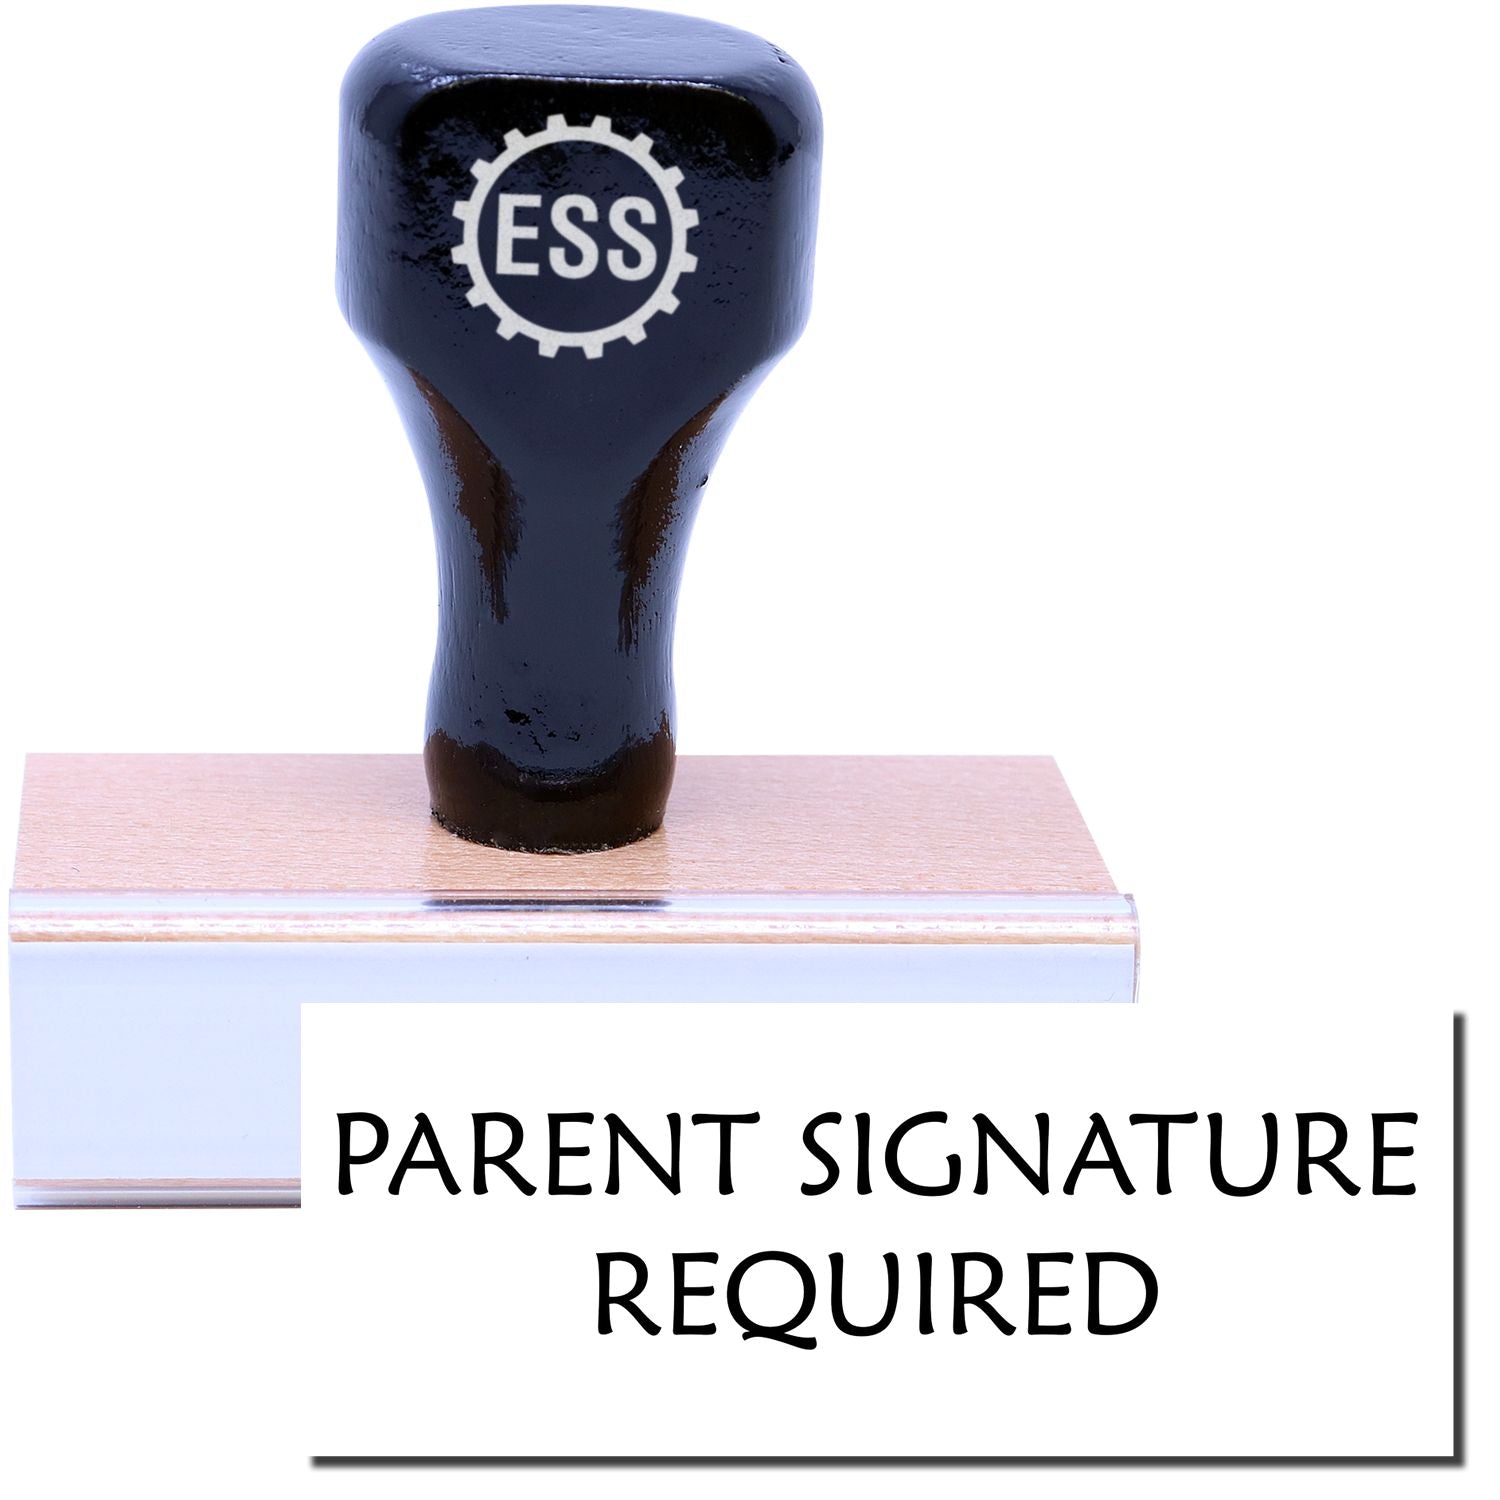 A stock office rubber stamp with a stamped image showing how the text "PARENT SIGNATURE REQUIRED" in a large font is displayed after stamping.